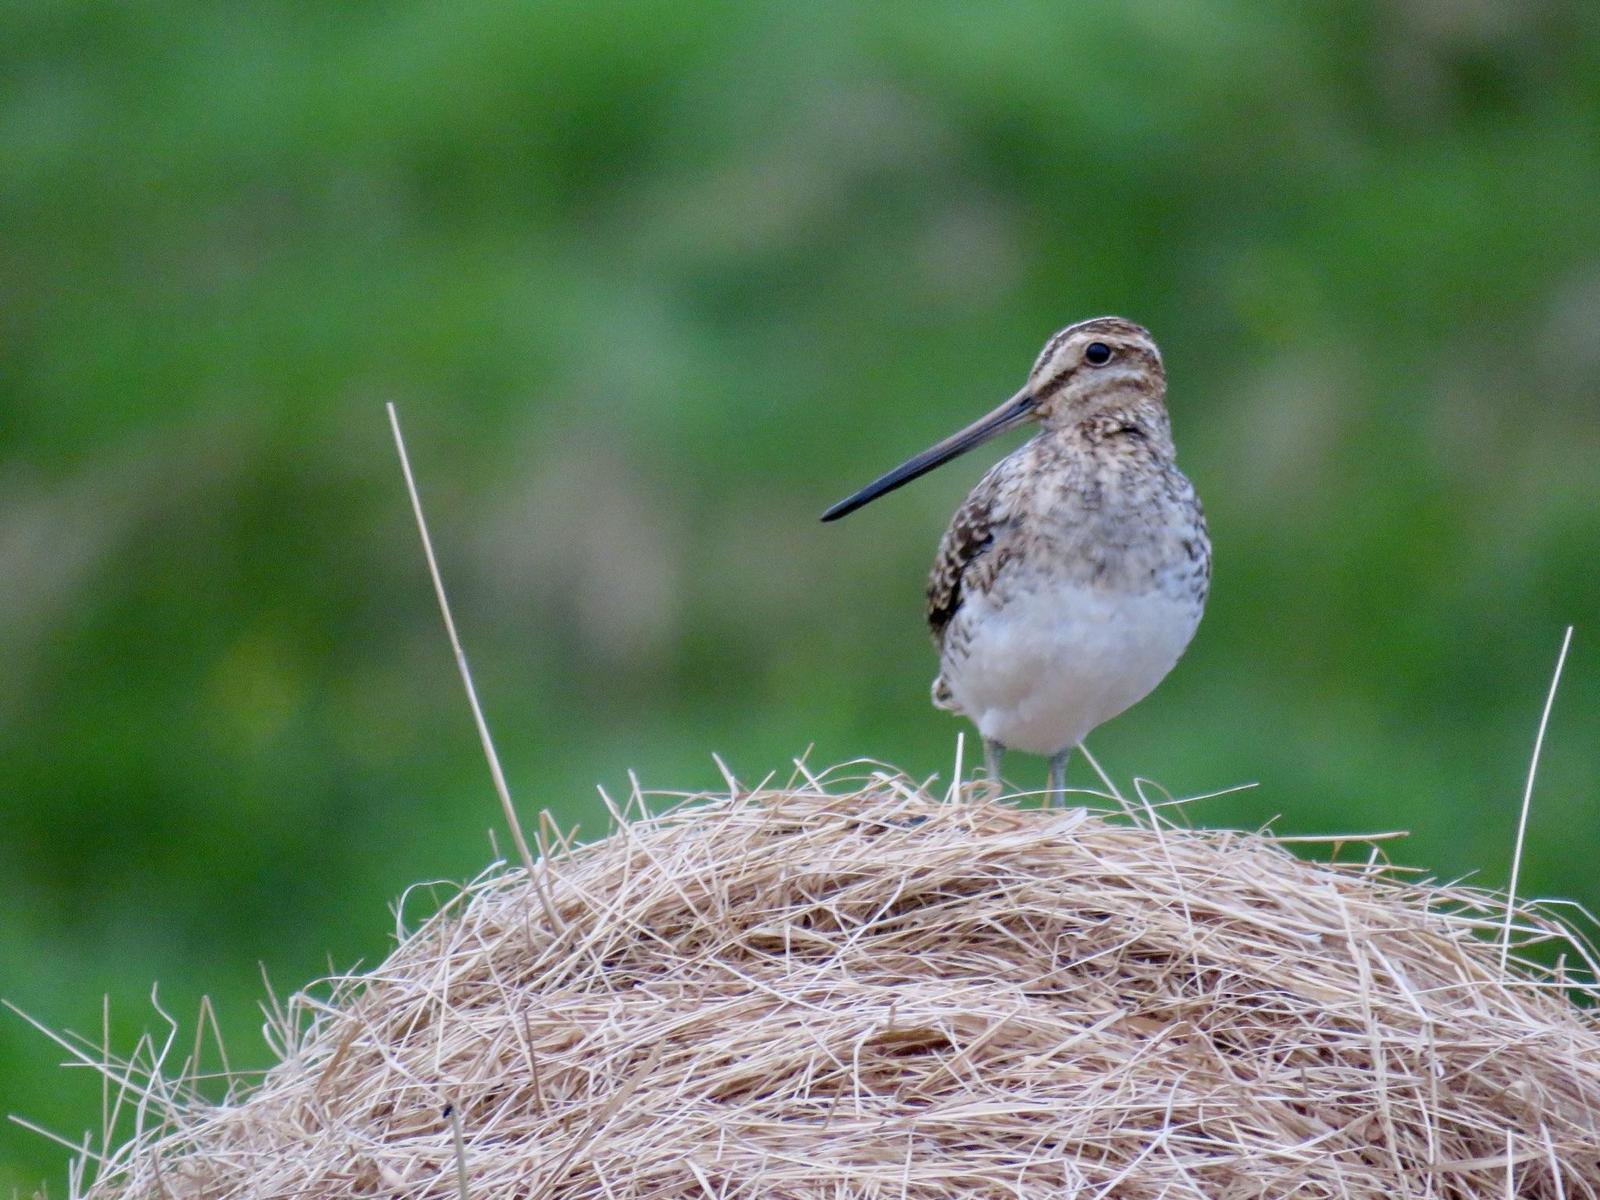 Common Snipe Photo by Lisa Owens